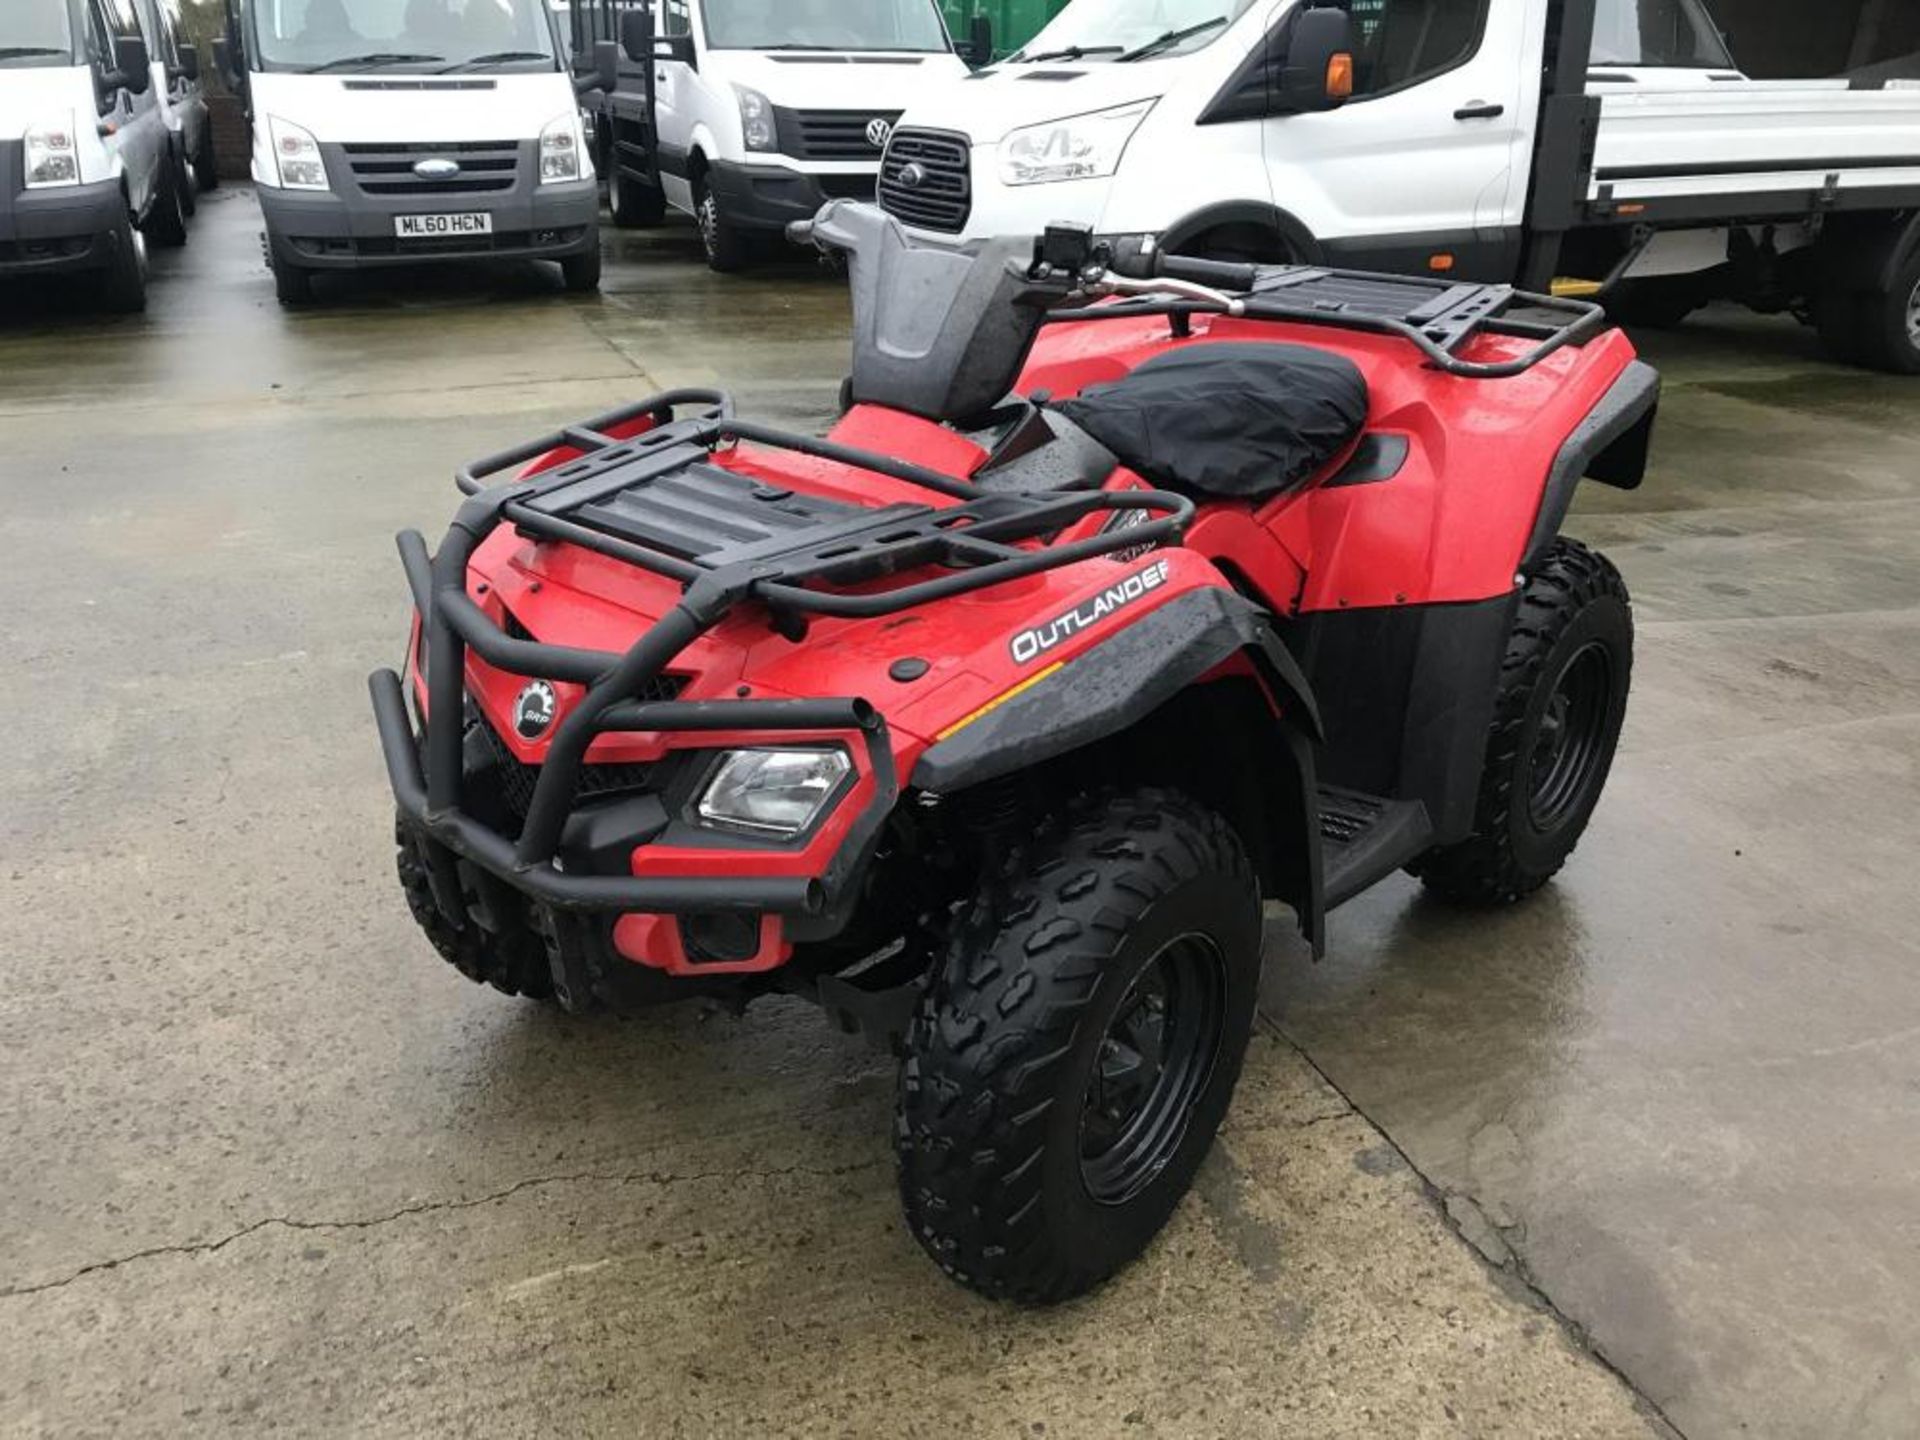 2013 CAN-AM 400 QUAD BIKE, RUNS, WORKS AND DRIVES *PLUS VAT* - Image 9 of 10